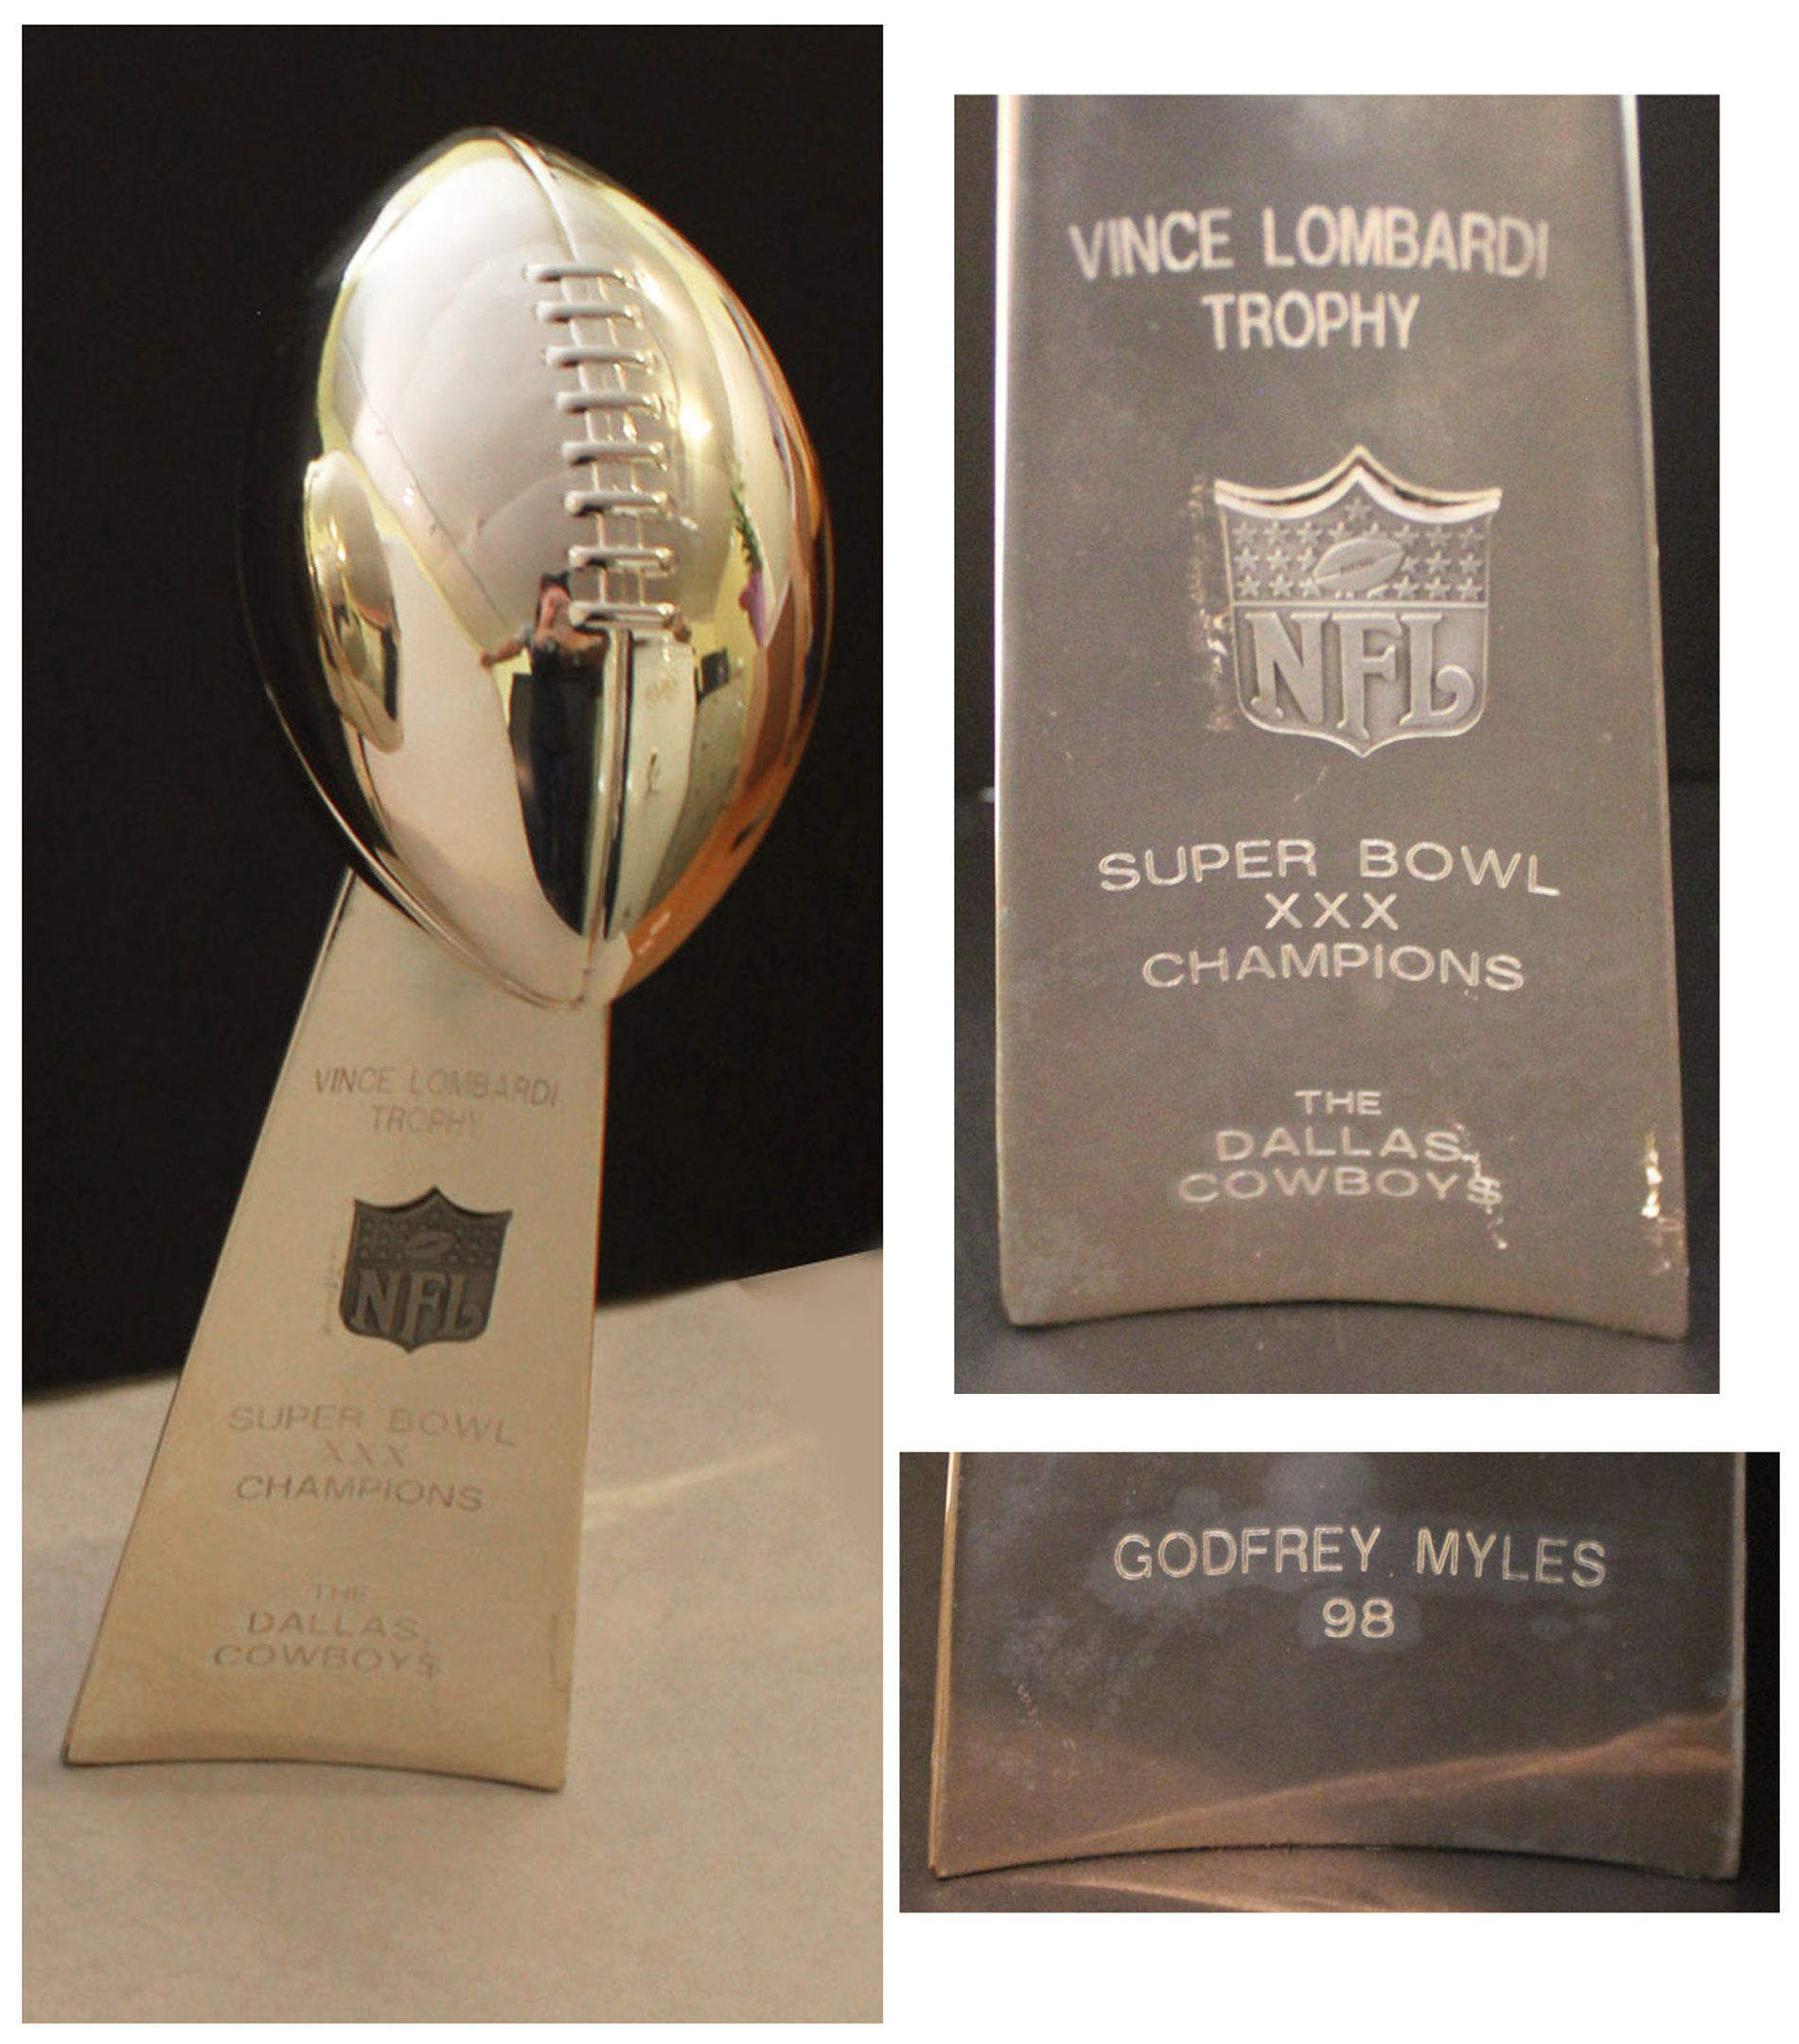 Joe Jackson Game Used Bat Heisman Trophy Super Bowl trophy auction Vince Lombardi Super Bowl XXX Trophy -- Exceedingly Rare Trophy Was Made for Players of Only a Few Super Bowl Winning Teams -- Given to Cowboys Linebacker Godfrey Myles